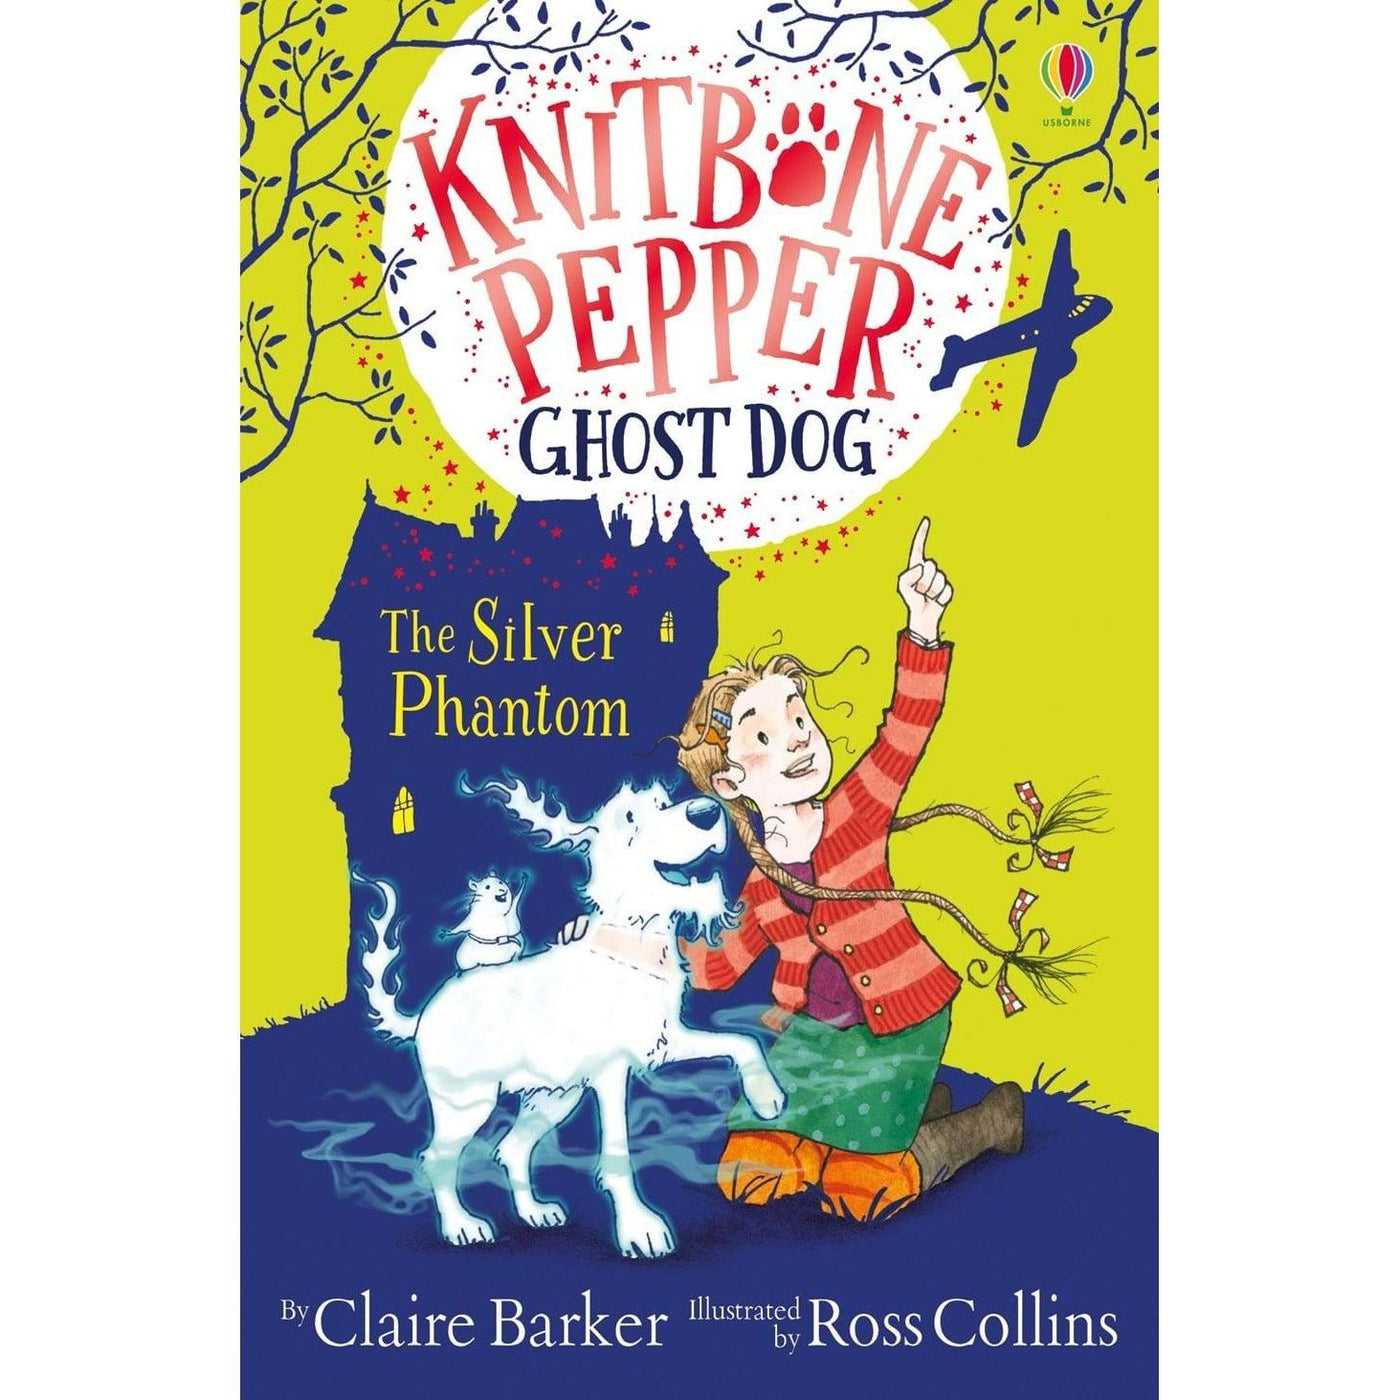 The Silver Phantom (Knitbone Pepper Ghost Dog Book 4) - Claire Barker